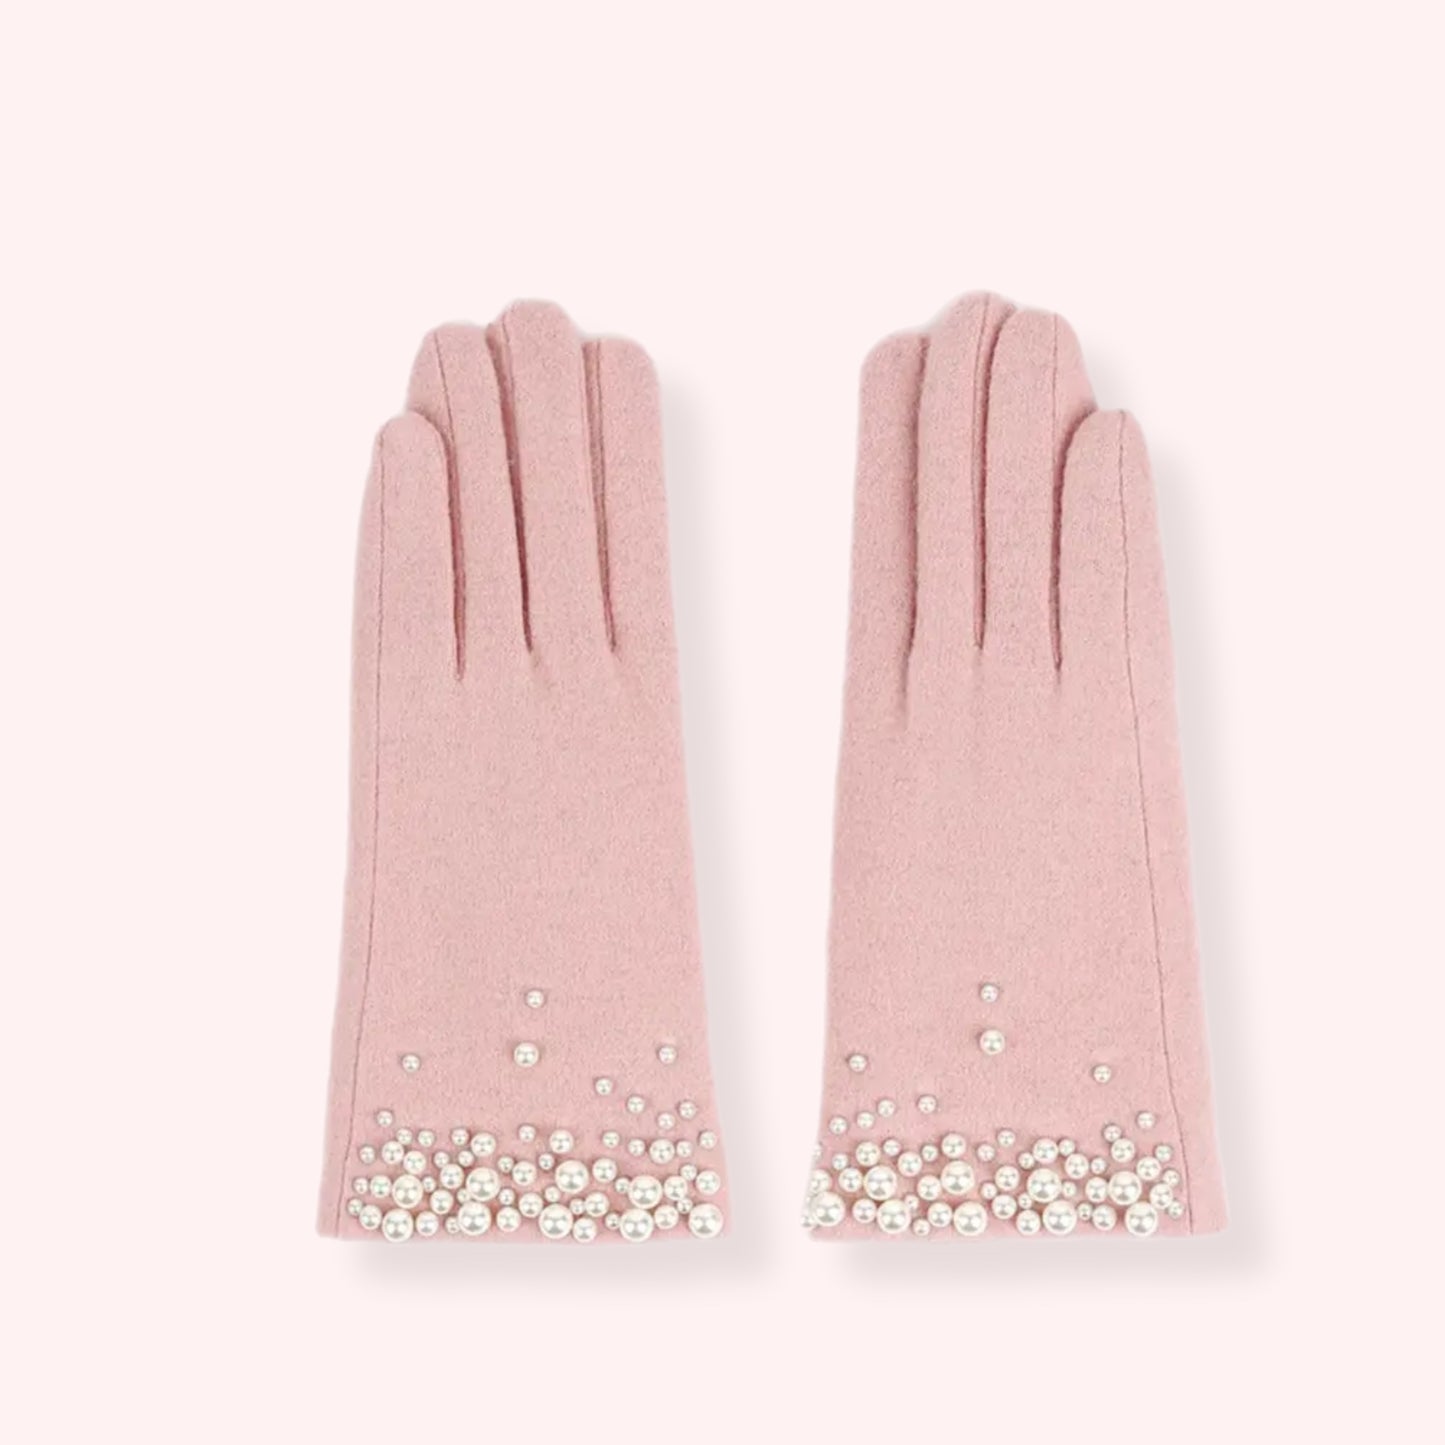 Covered in Pearls Gloves